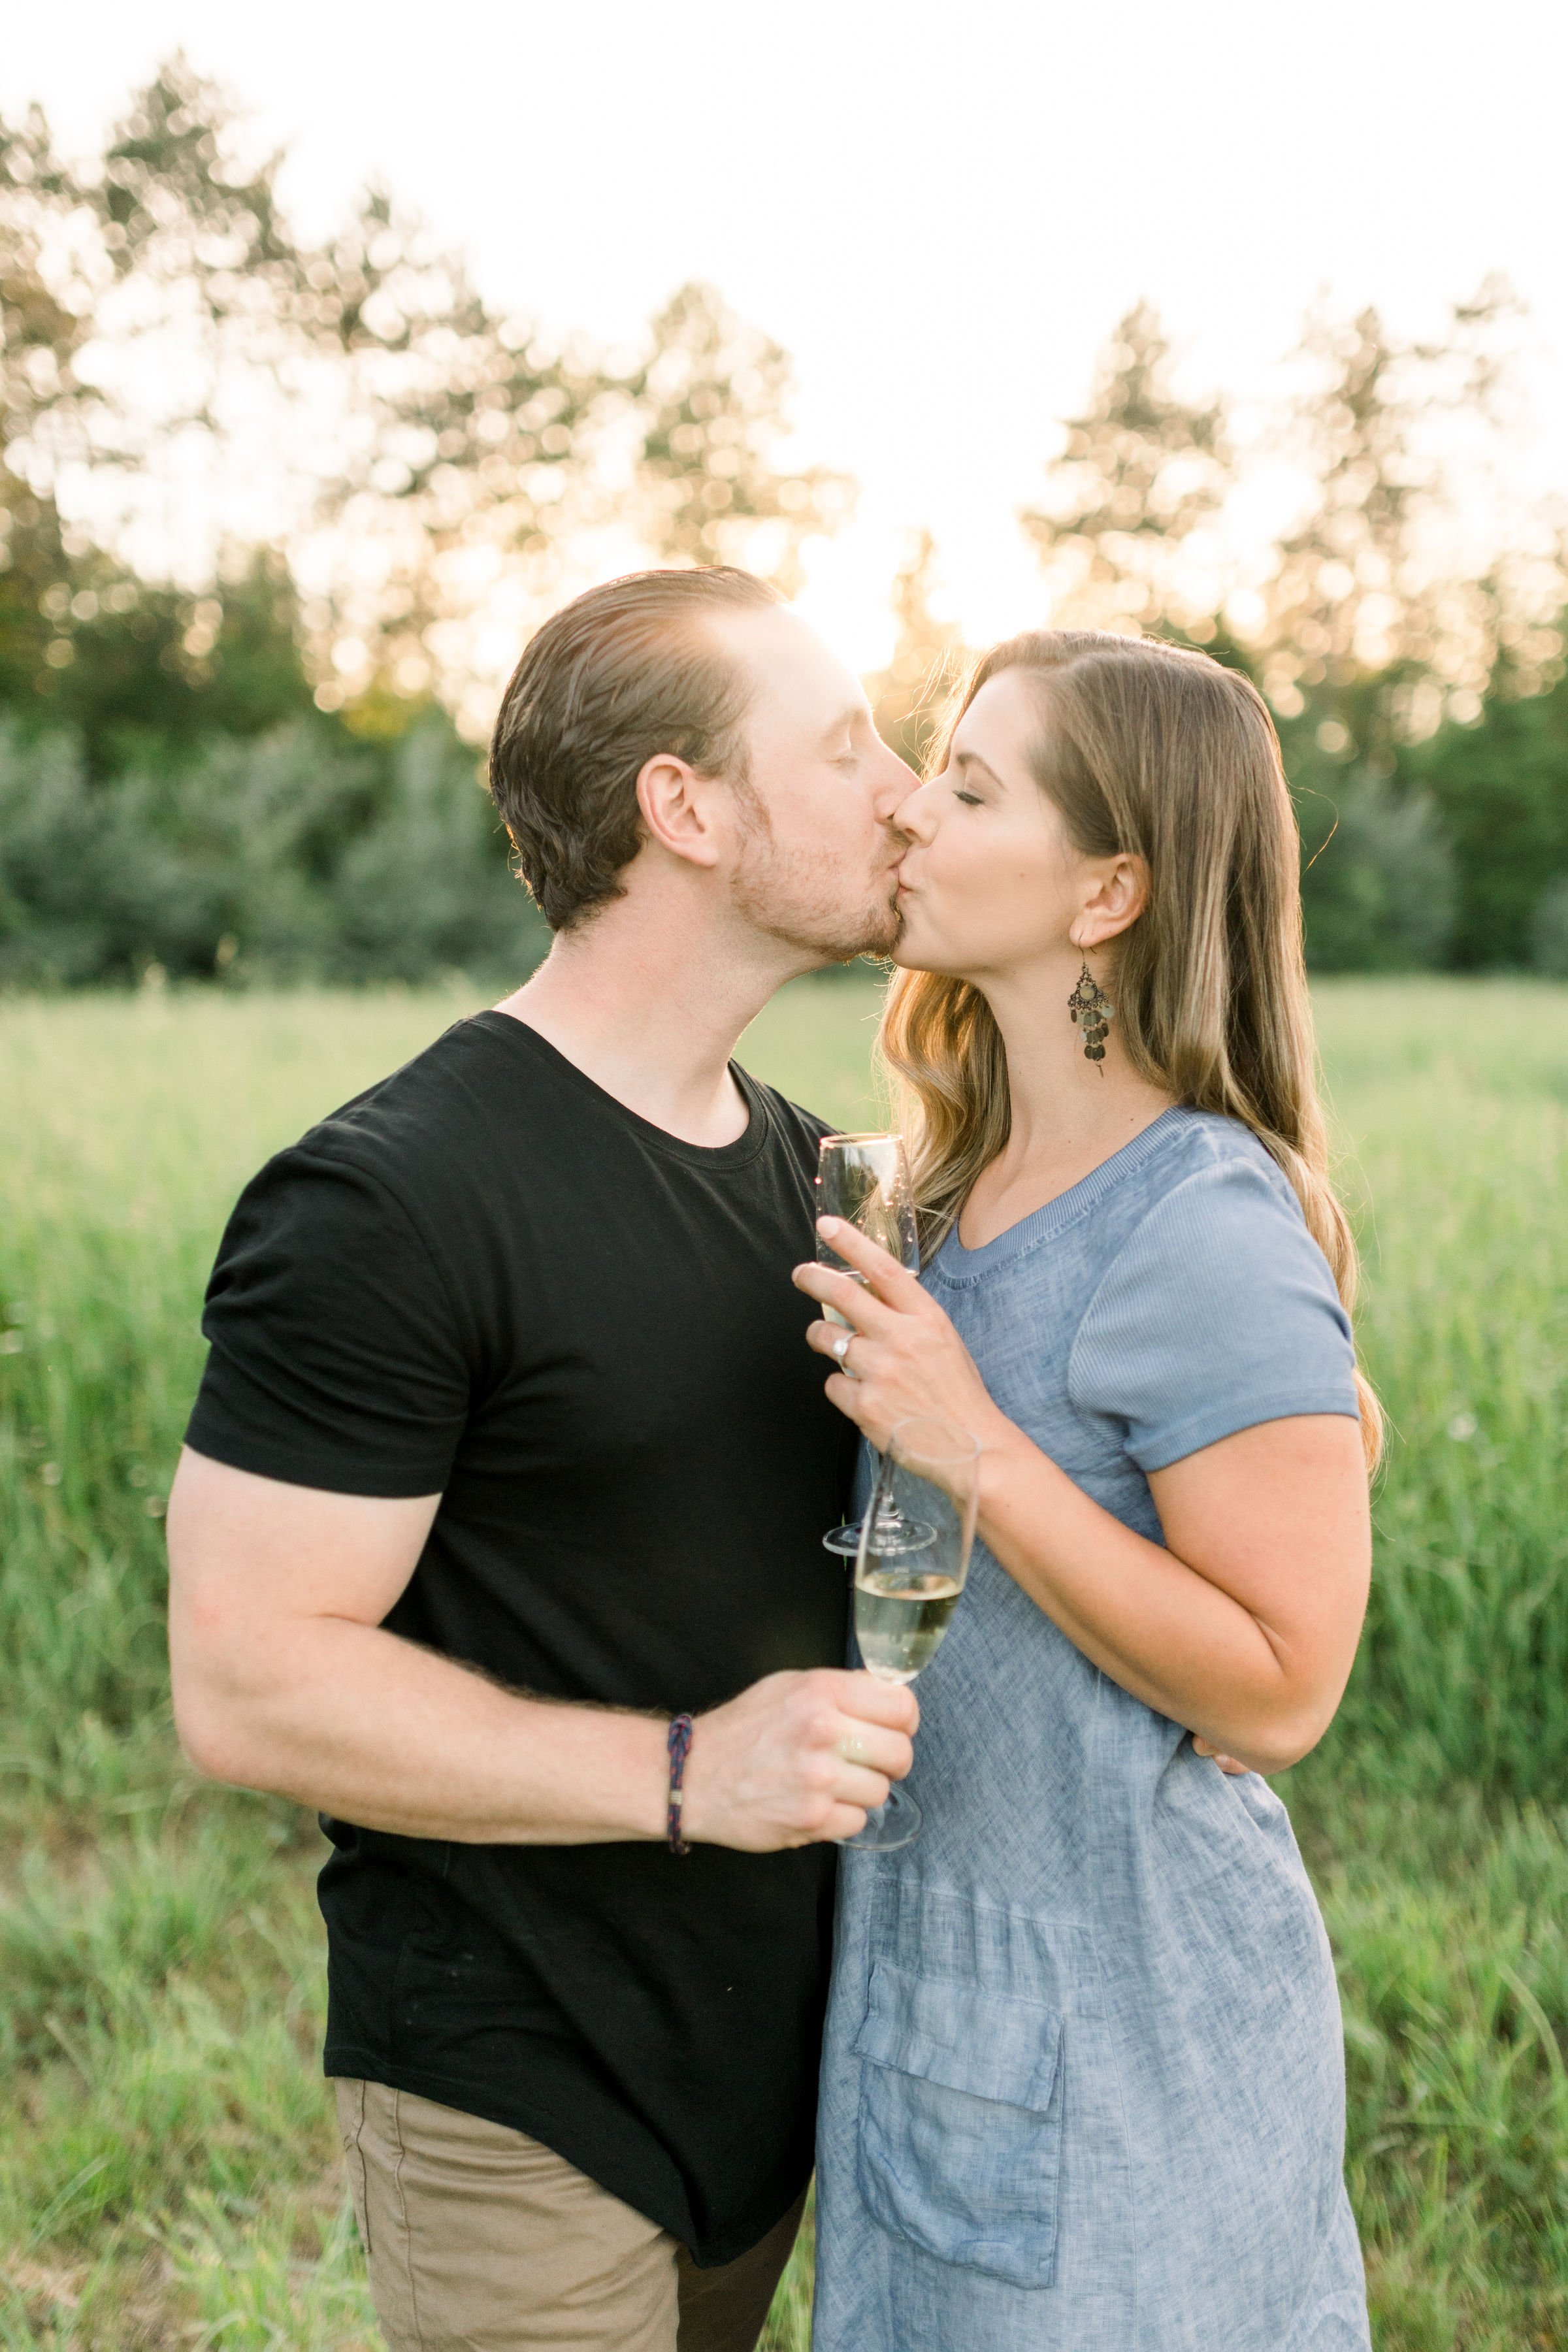  While kissing fiances hold their celebratory champagne glasses by Chelsea Mason Photography. Almonte photography champaign #chelseamasonphotography #chelseamasonengagements #Ottawaengagments #Almonteengagementphotographer #outdoorengagments 